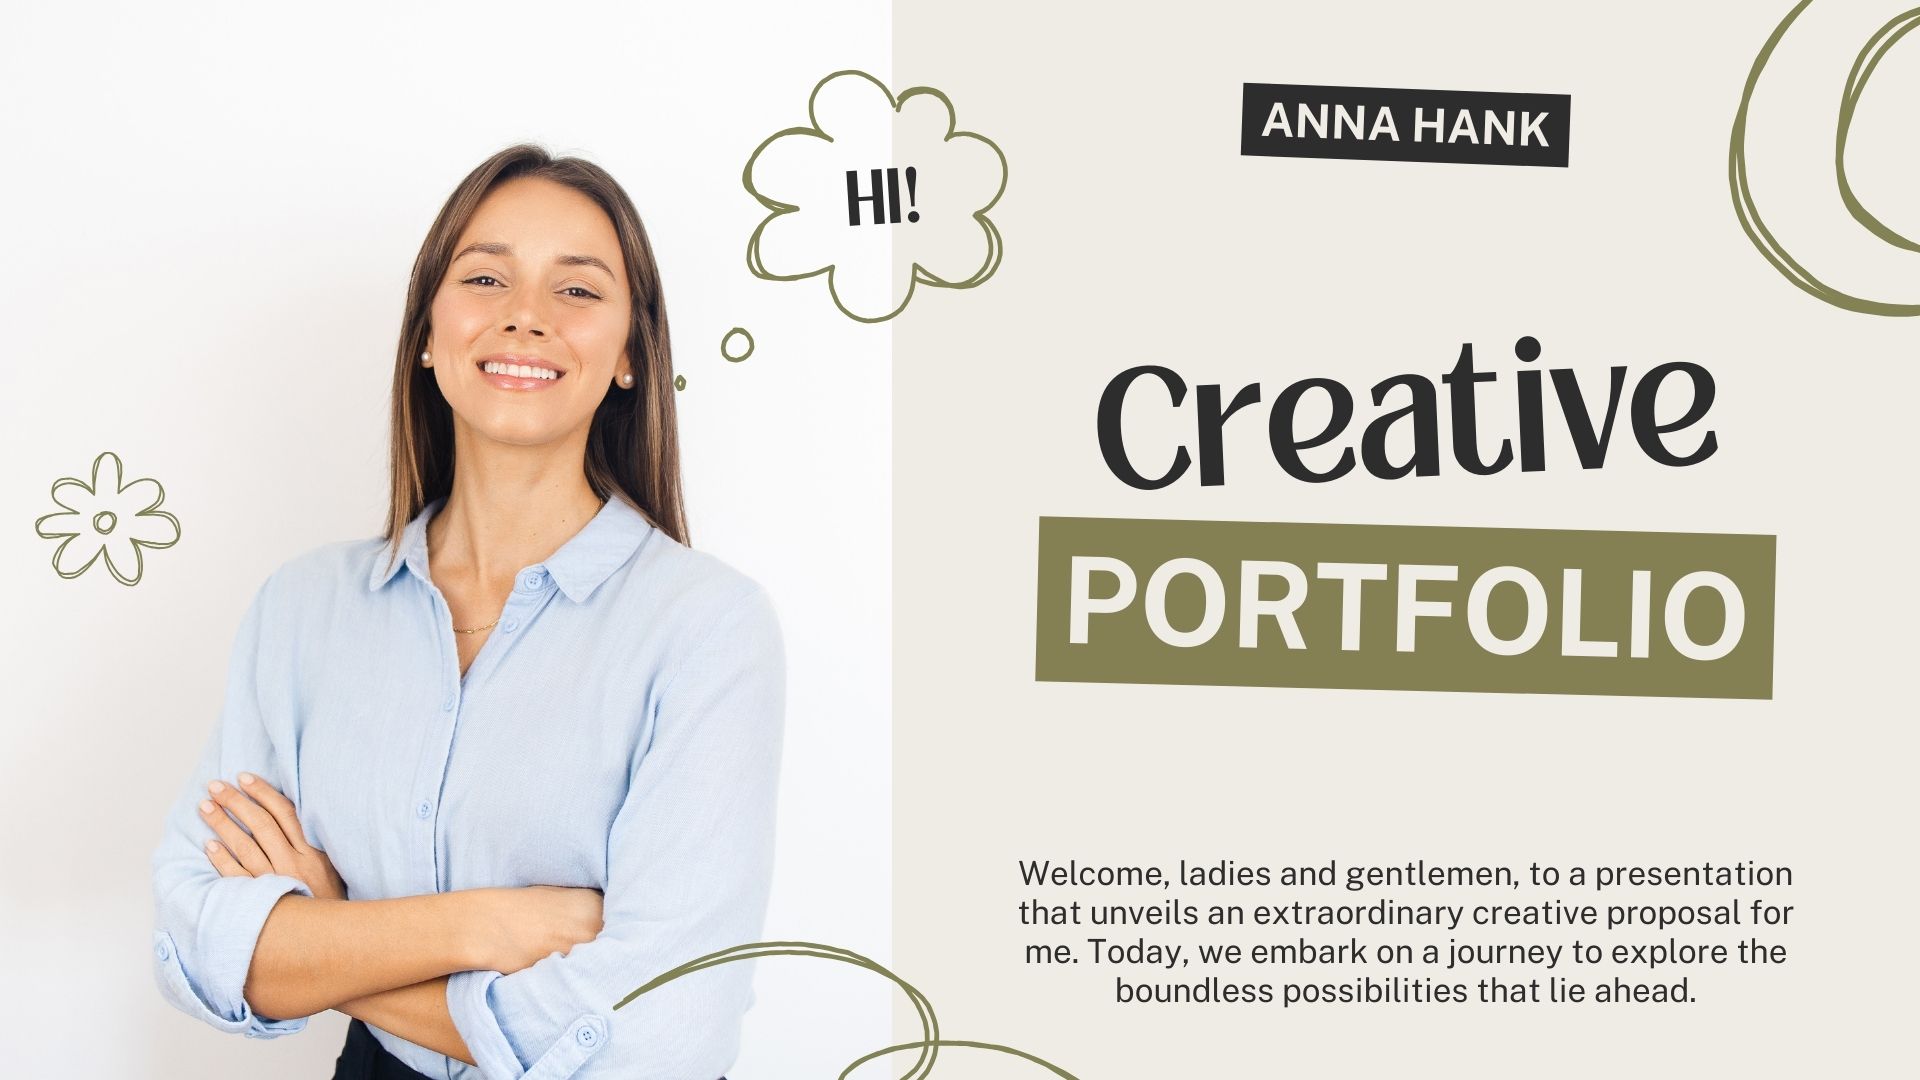 Free Powerpoint templates and Google Slides themes